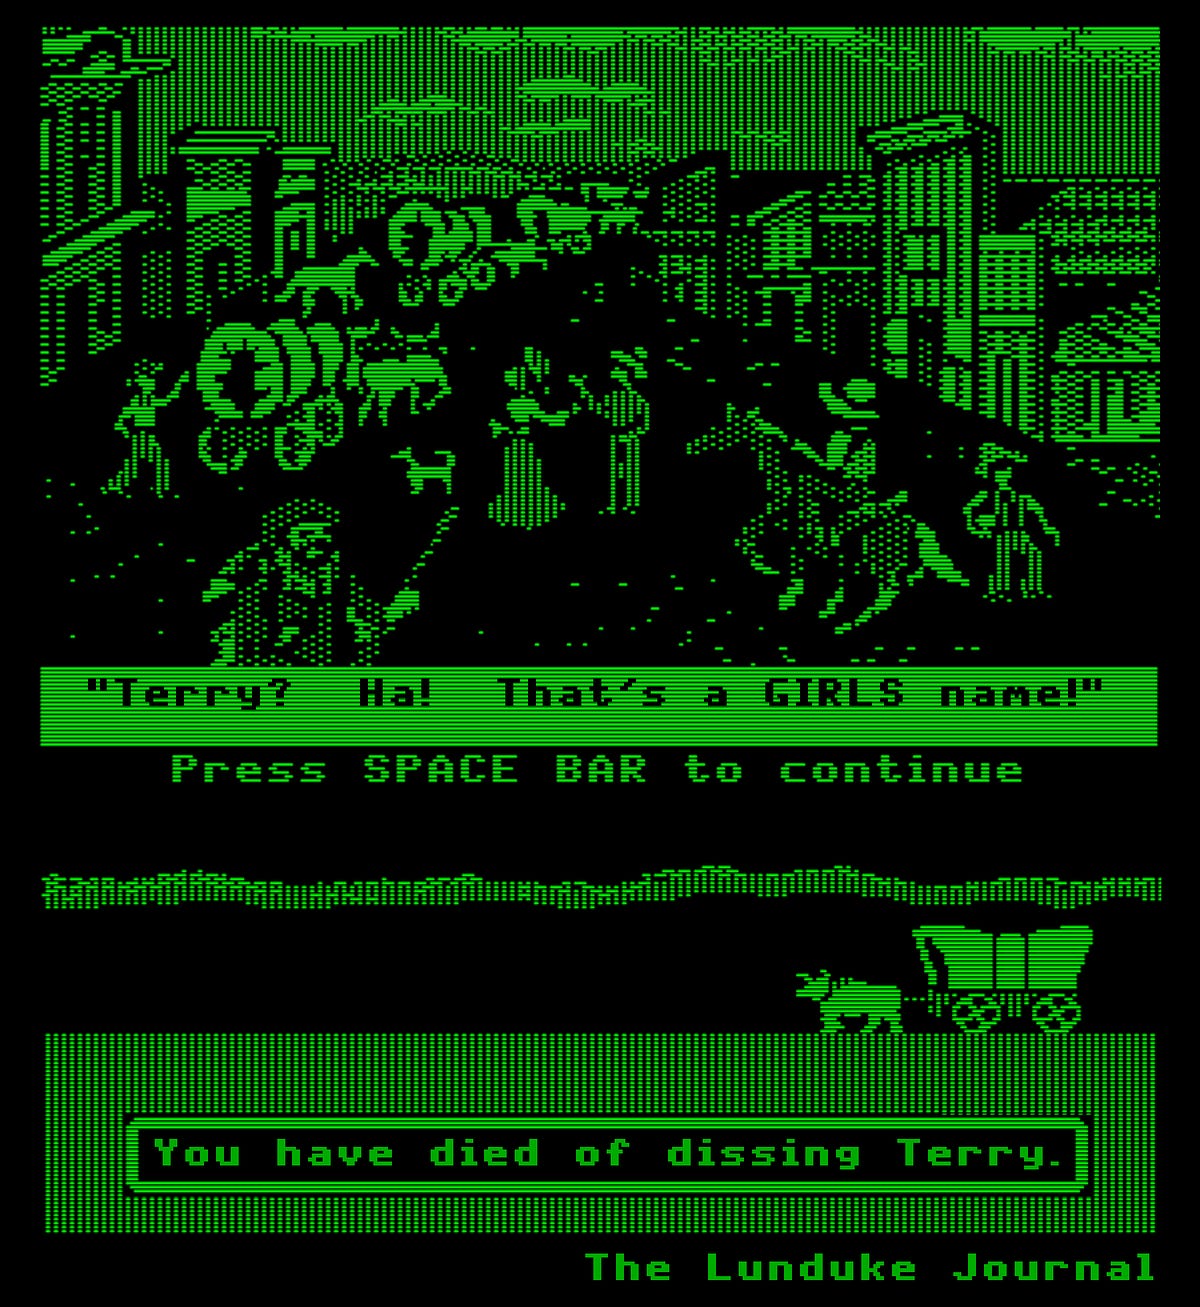 Man. Life on the Oregon Trail was rough!